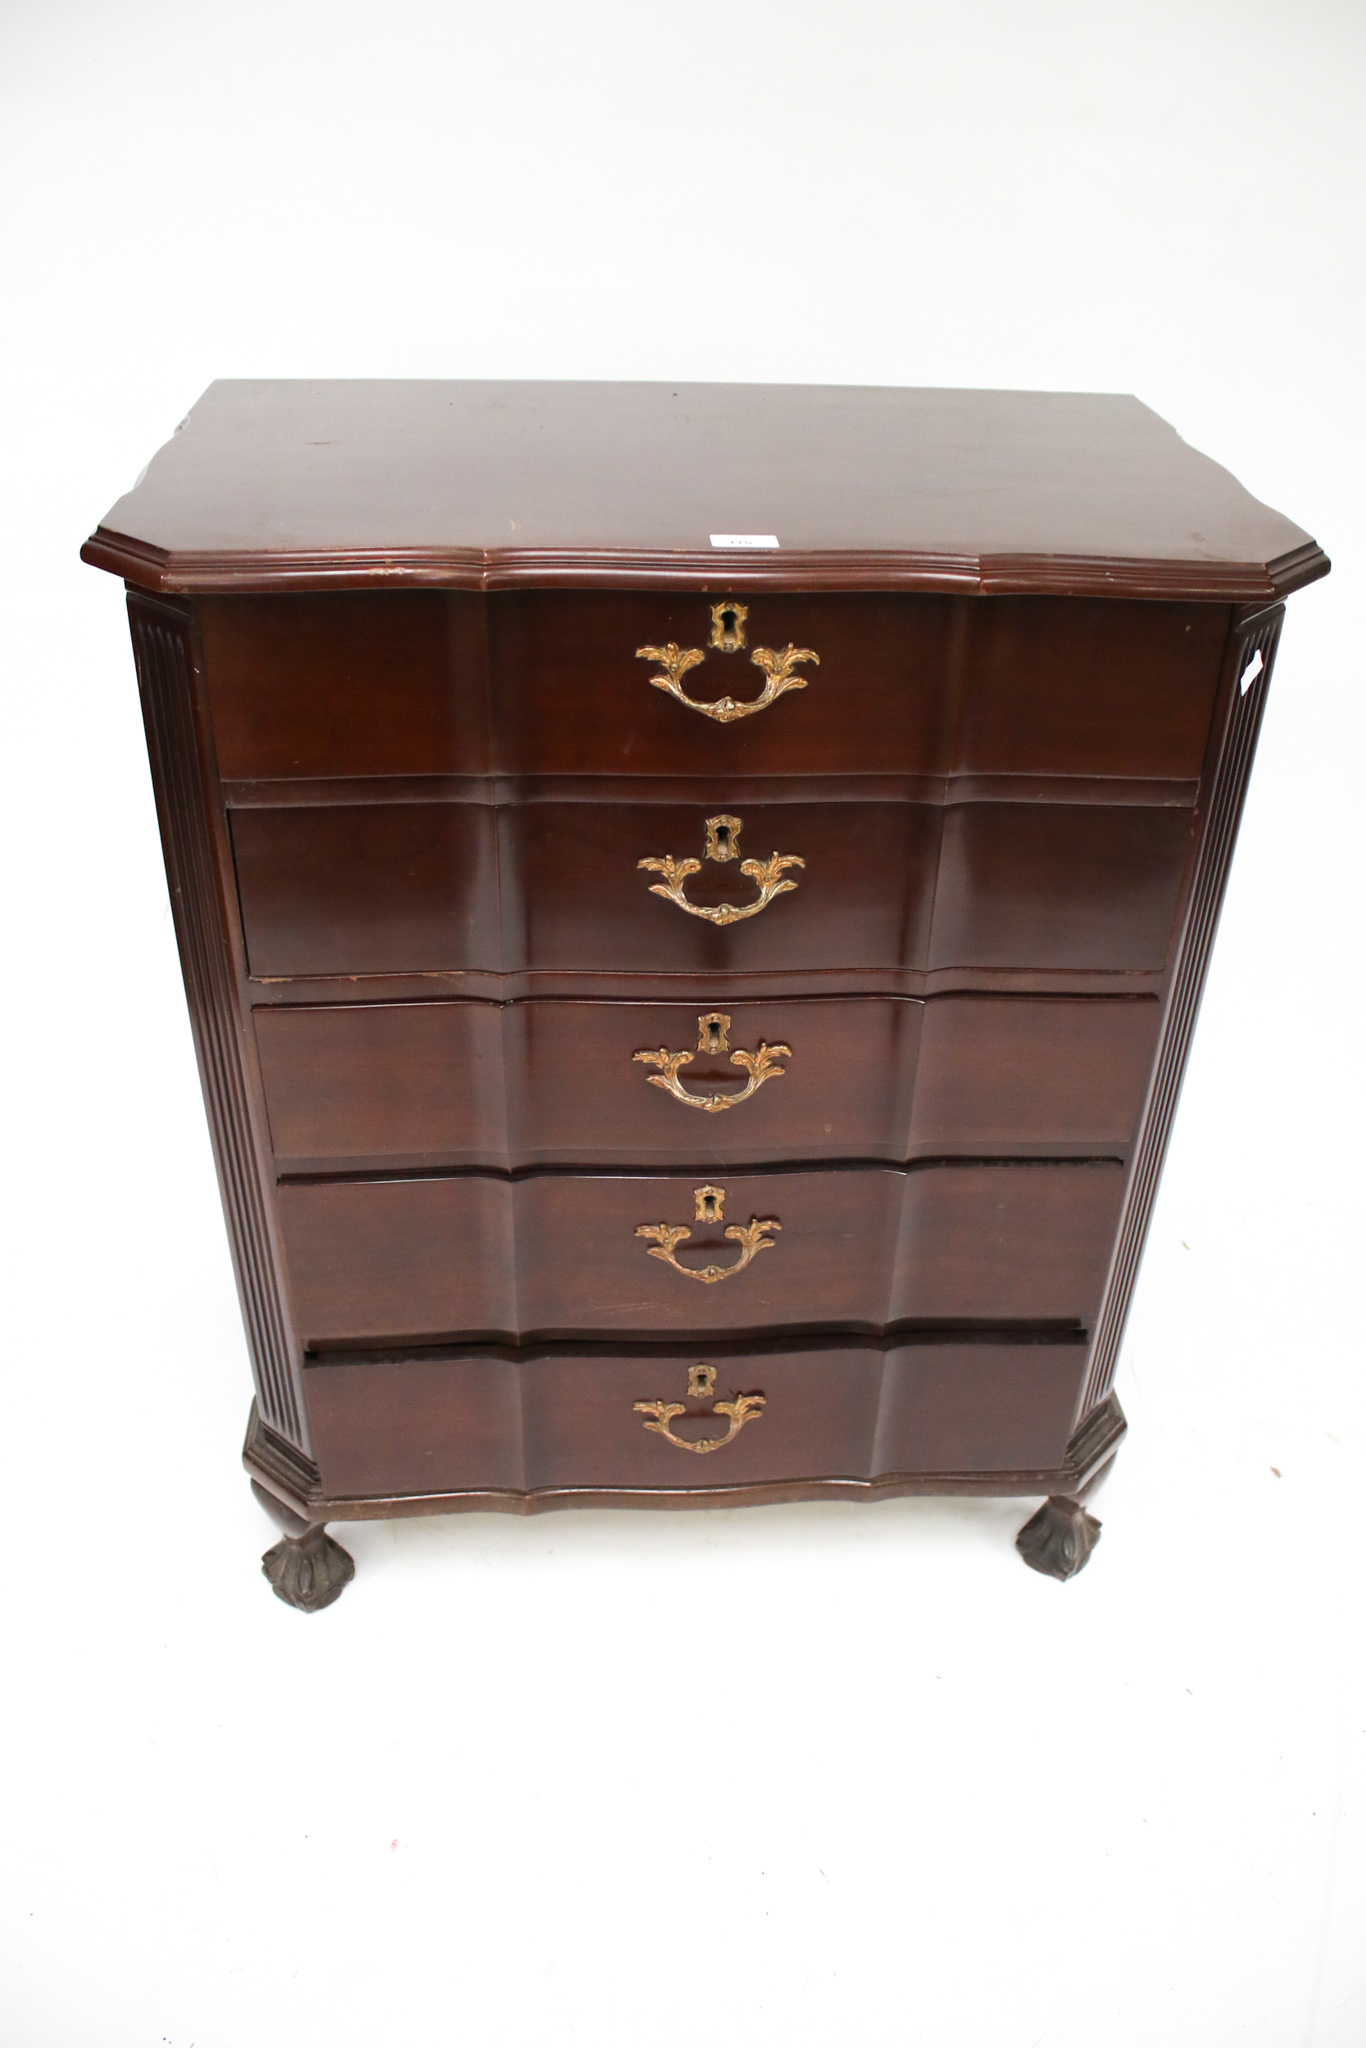 A 20th century chest of drawers.